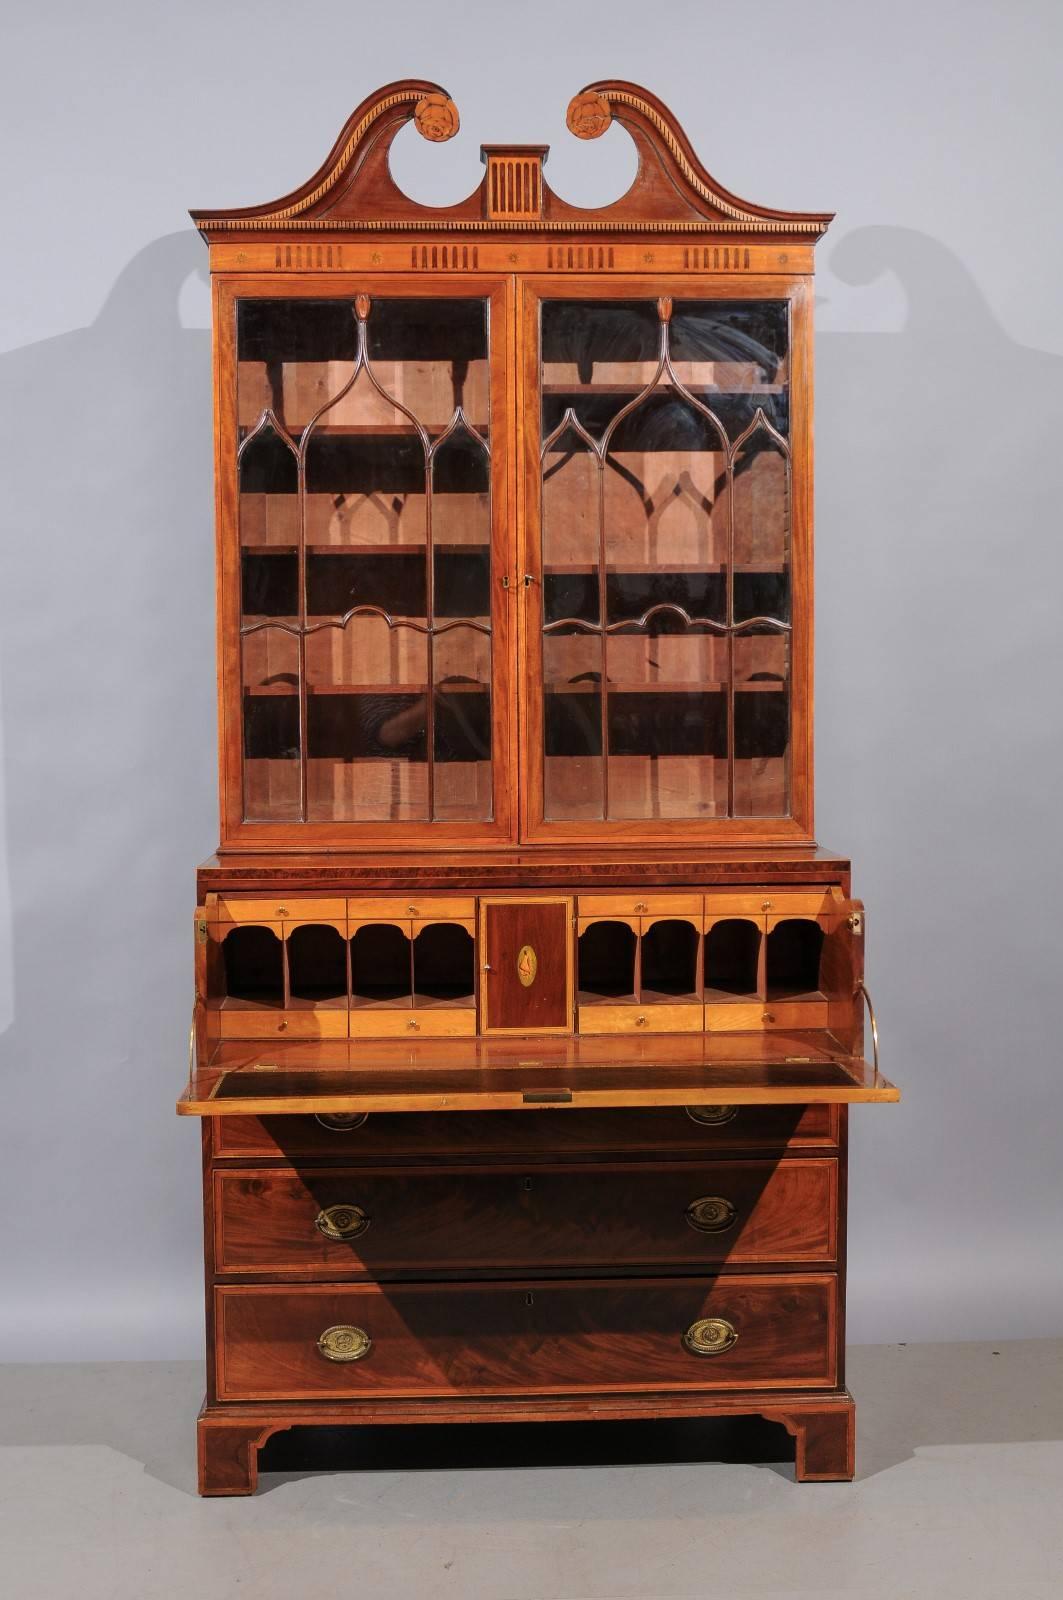 Glass George III Secretary Bookcase in Mahogany & Satinwood with Swan Neck Pediment